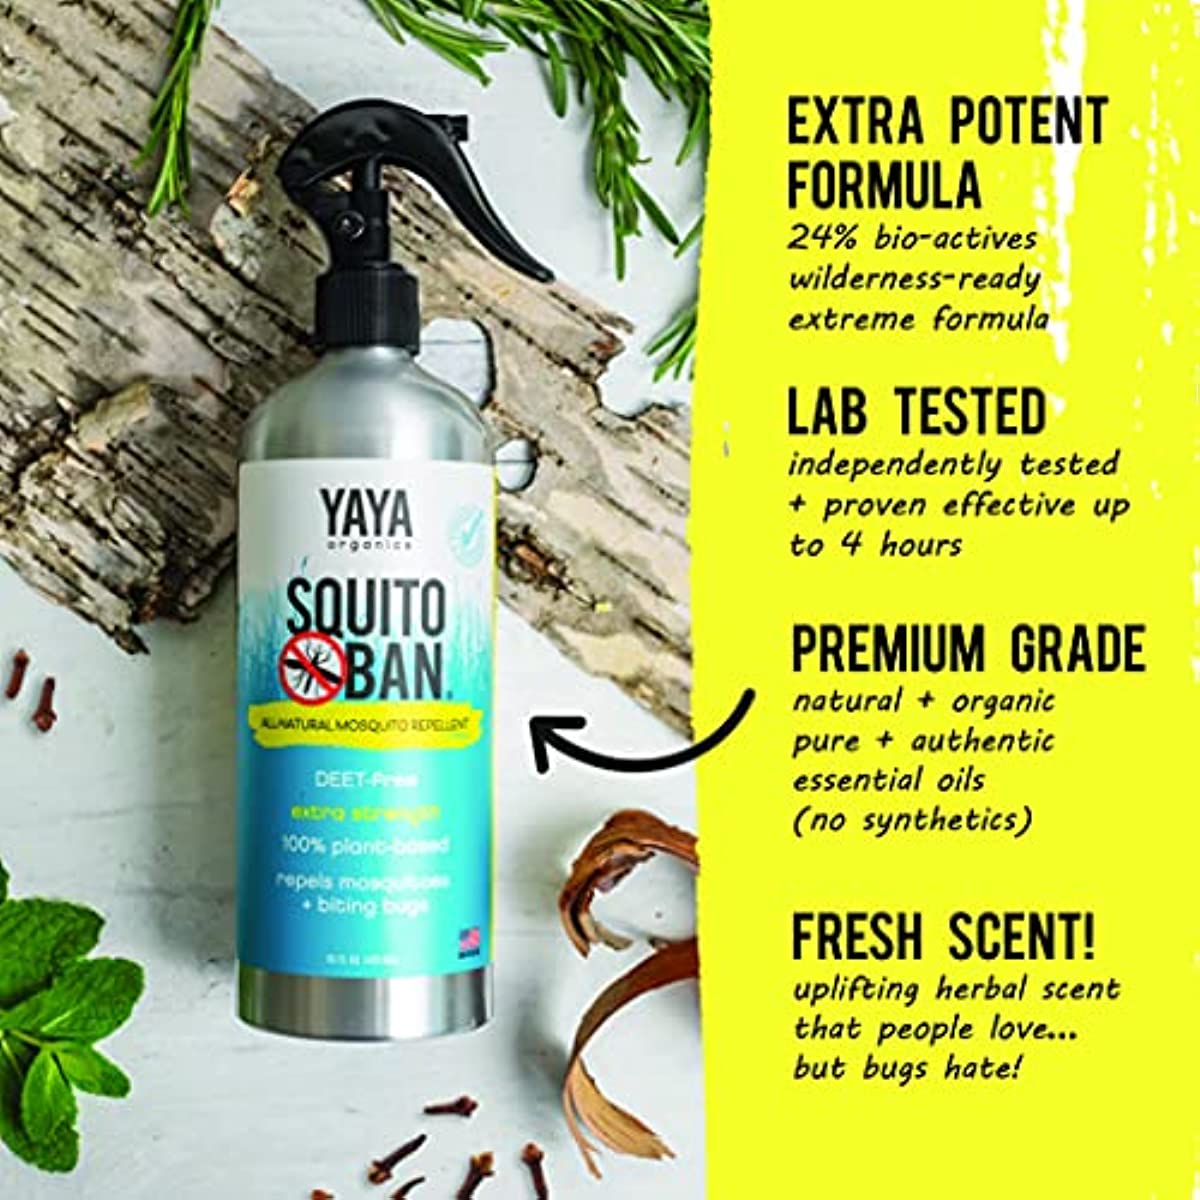 Squito Ban - Yaya Organics Mosquito Repellent, All Natural Bug Spray, Proven Effective, Family Friendly, Deet-Free | 16 ounces